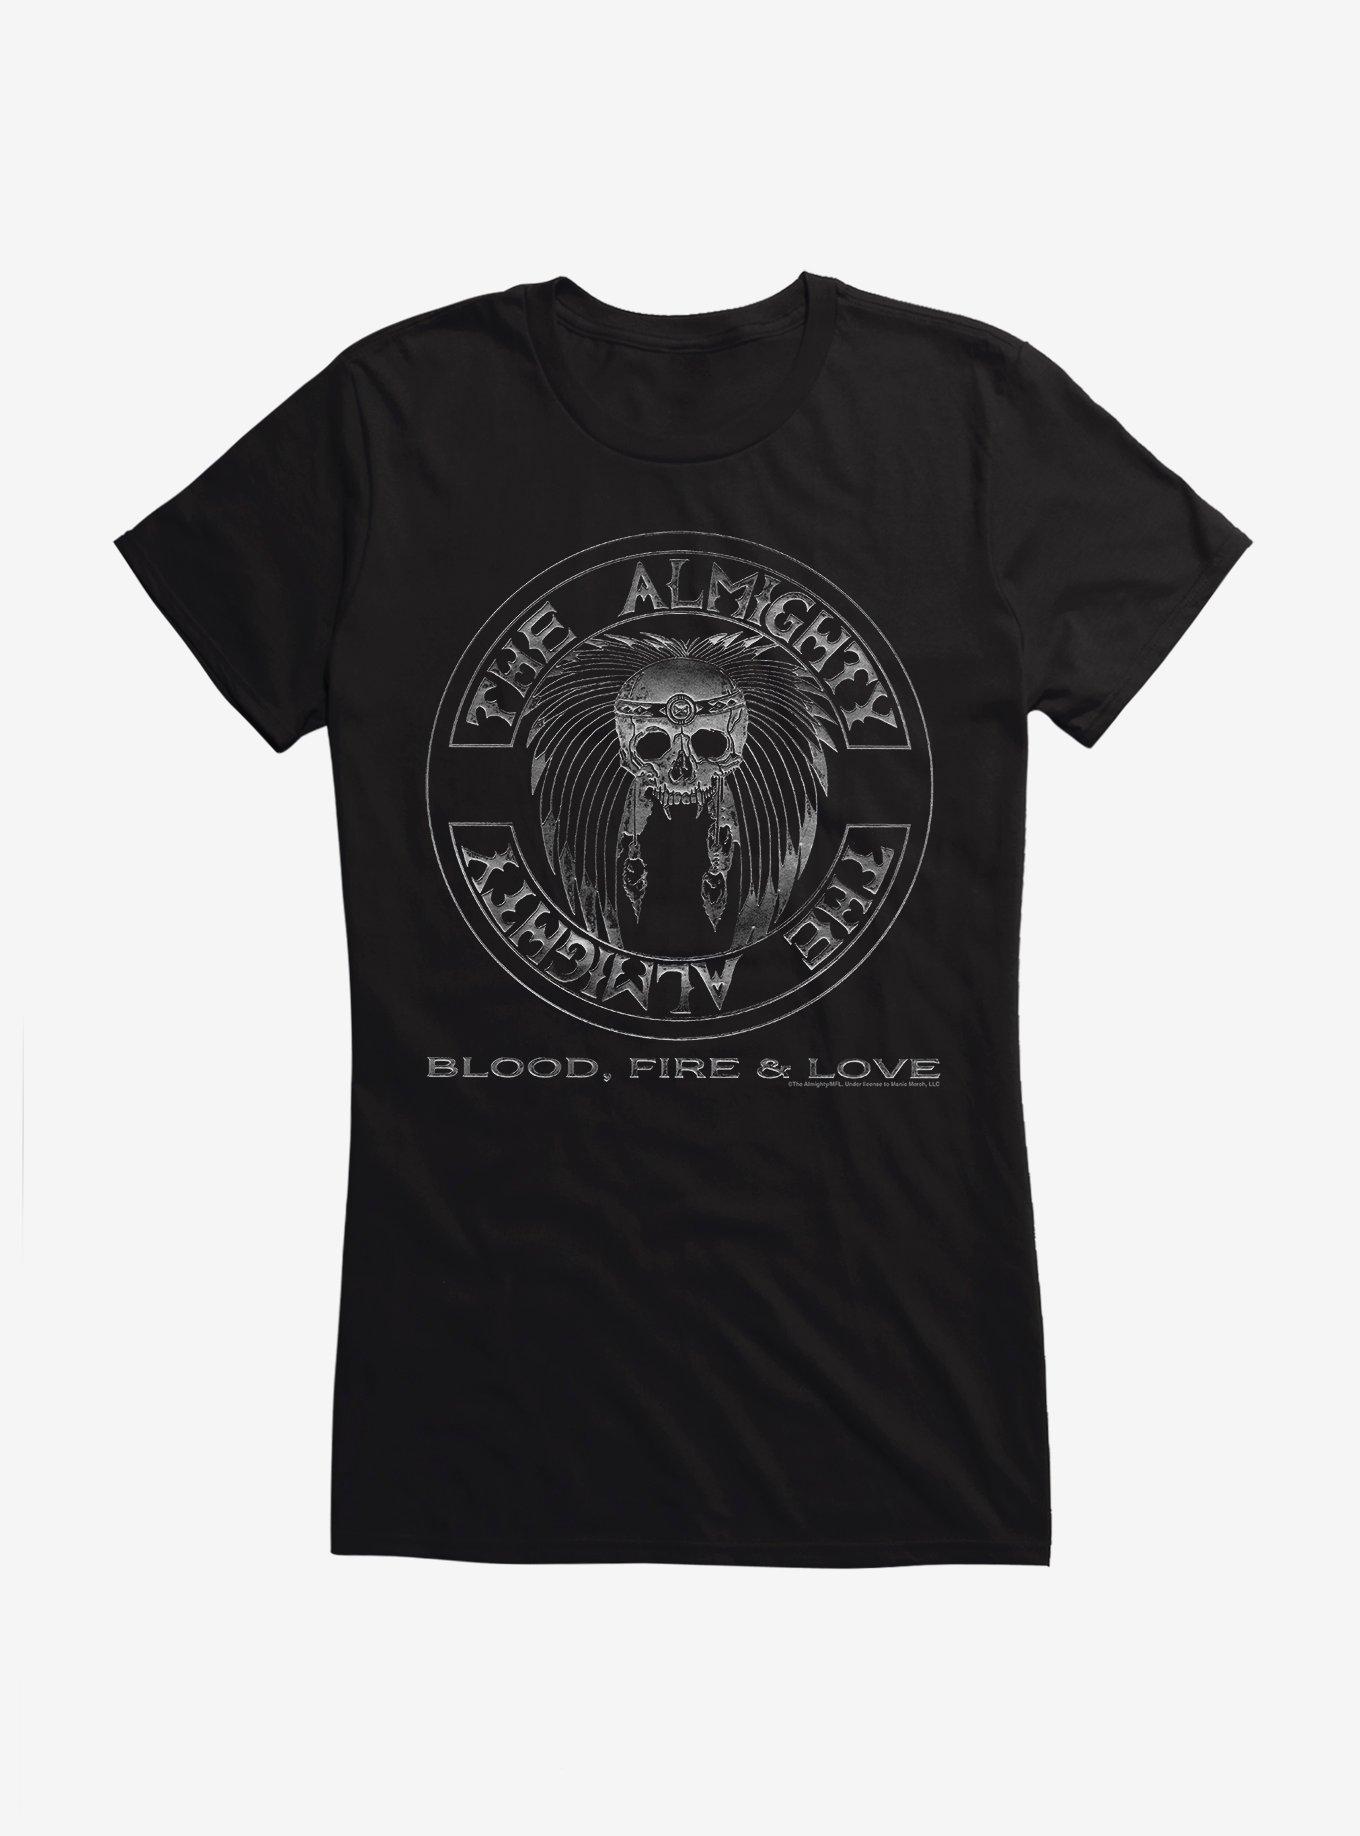 The Almighty Blood, Fire & Love Girls T-Shirt, BLACK, hi-res